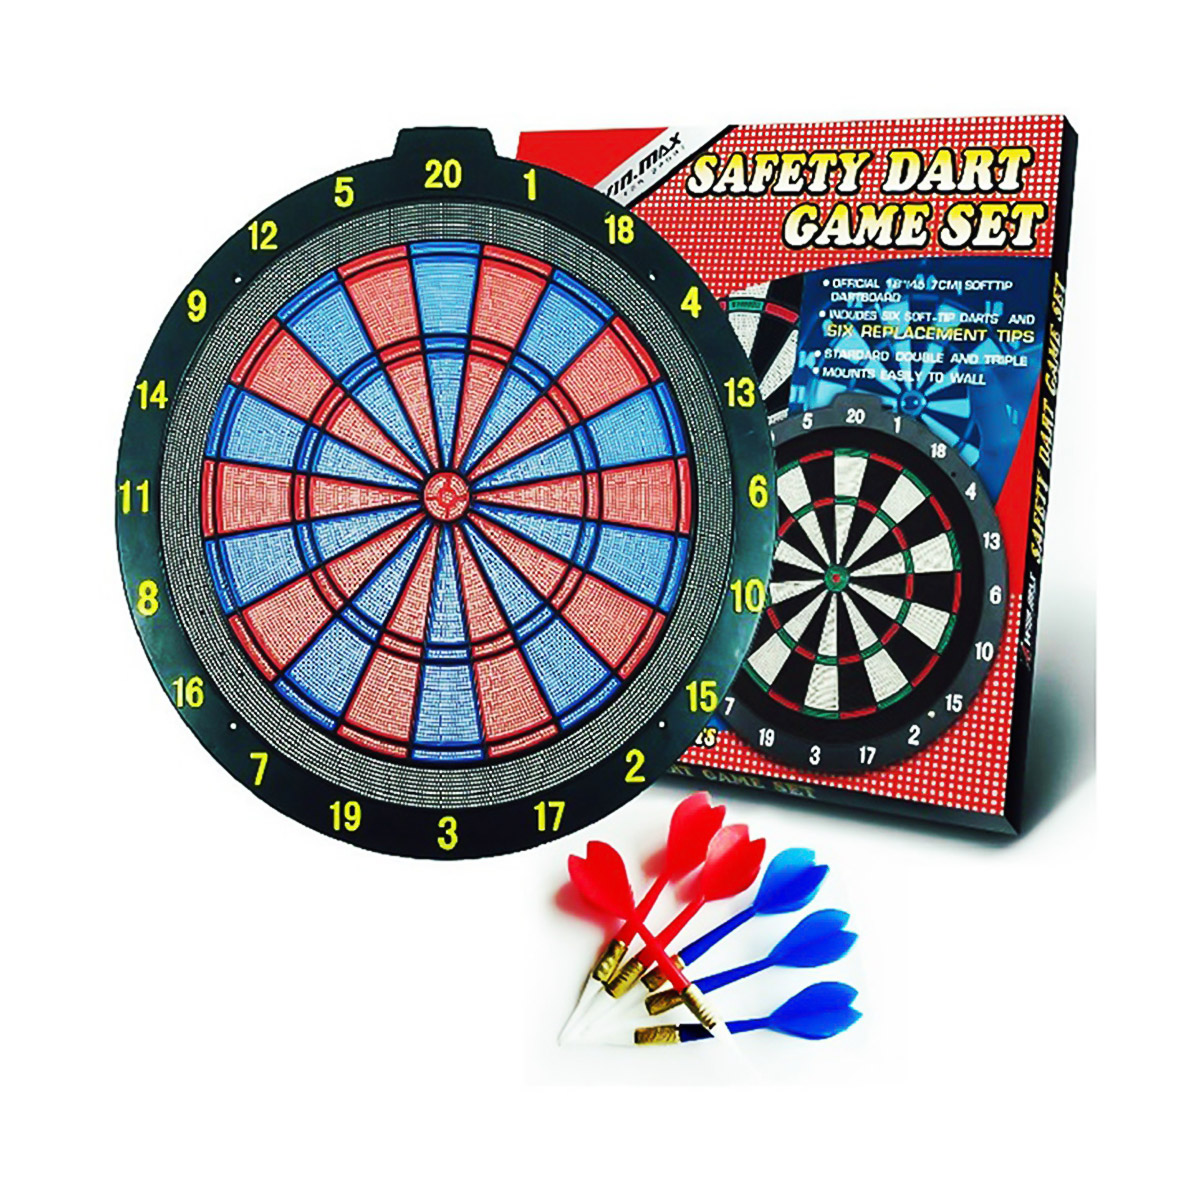 https://www.winmaxdartgame.com/official-18-softip-dartboard-includes-six-soft-tip-darts-and-six-replacement-tips-win-max-3-product/